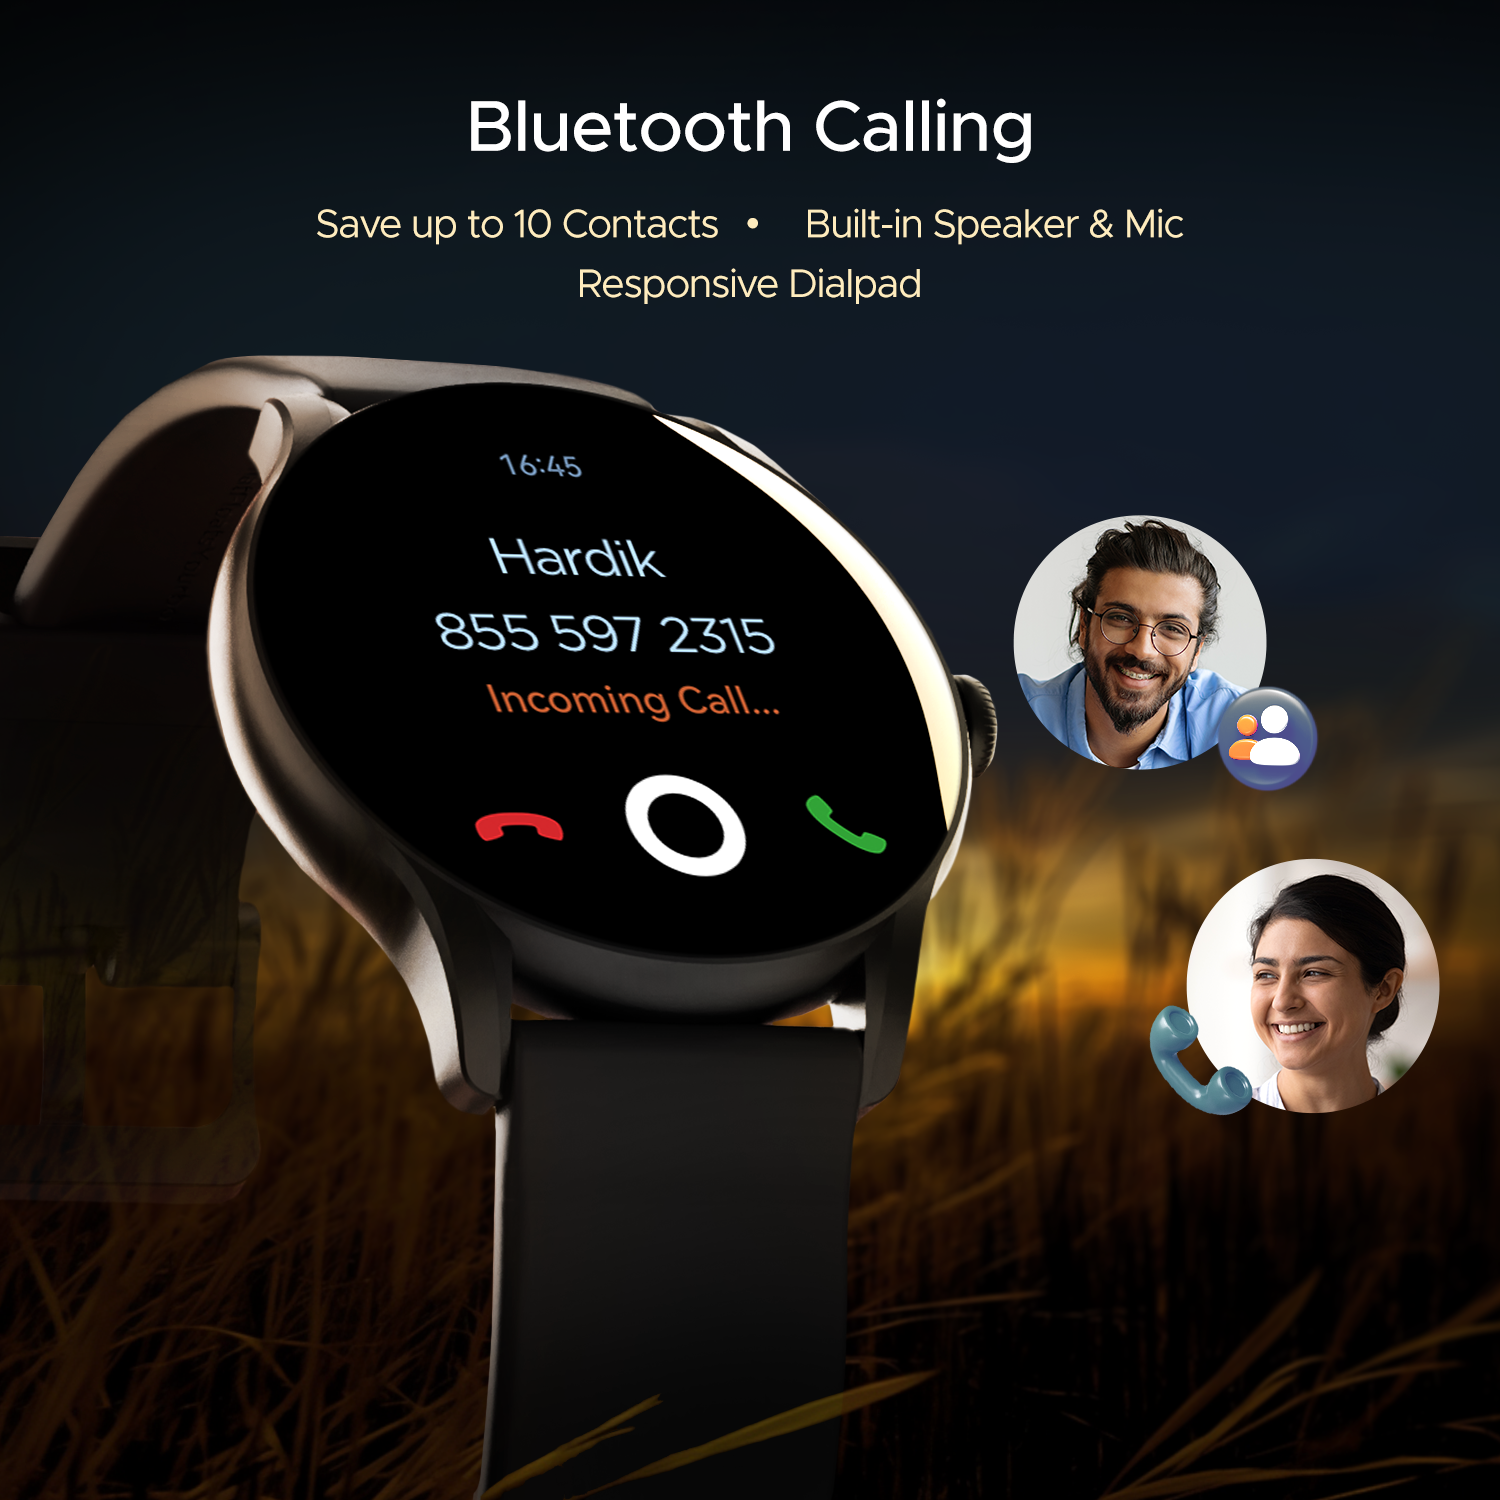 boAt Lunar Connect Ace | Round AMOLED Display Smartwatch with 1.43" (3.63 cm) Screen, Bluetooth Calling, 100+ Sports Modes